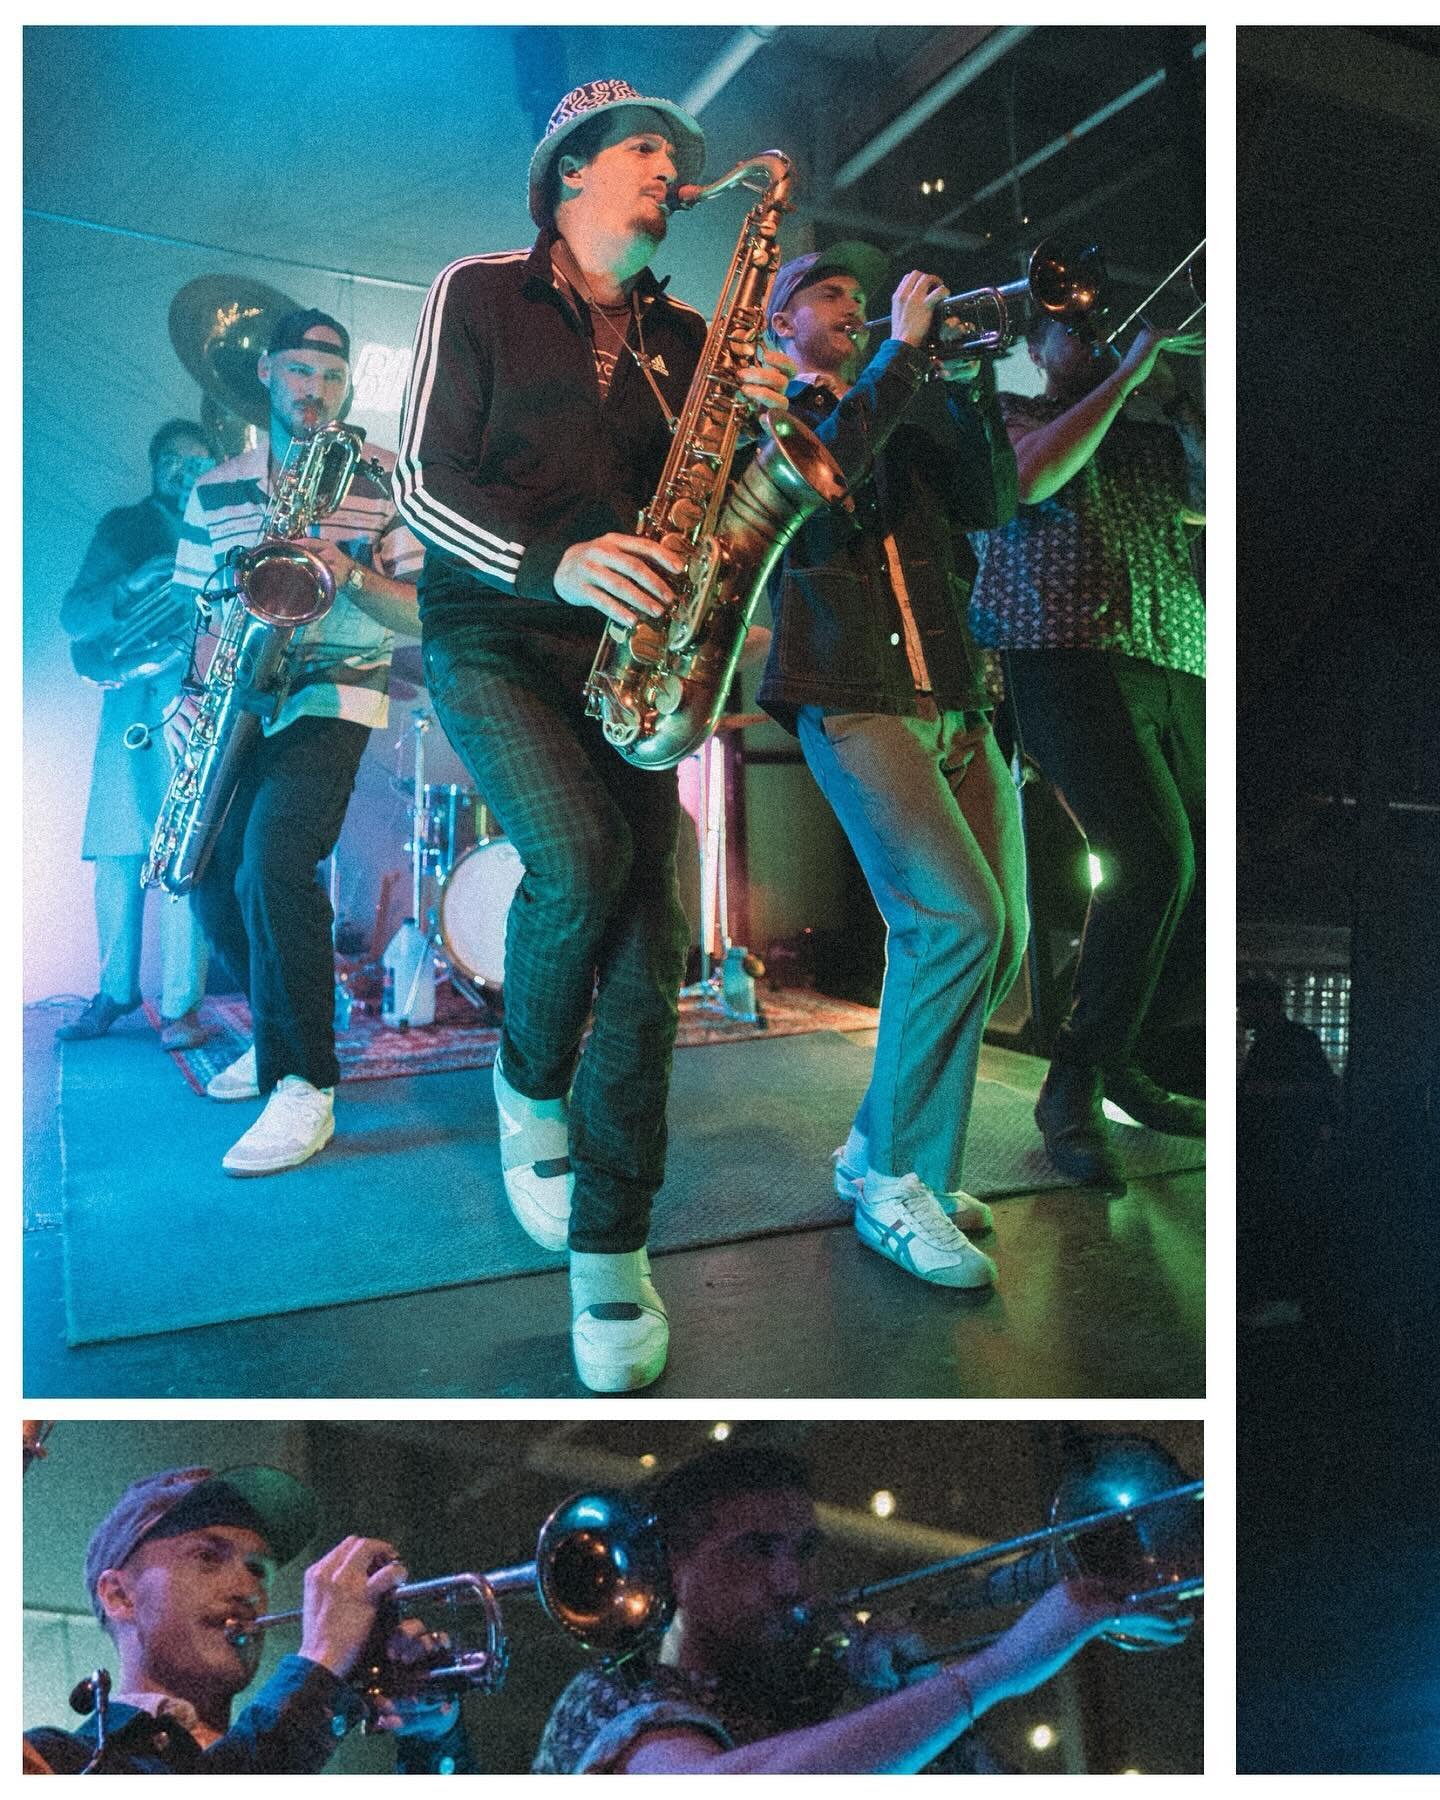 The 2024 season is ramping up 👀 We&rsquo;ve been hard at work writing new tunes and dialling in our stage setup to bring you a whole new live Big Smoke Brass experience for 2024 🎺🎉

Don&rsquo;t miss your next chance to see Big Smoke Brass live, ch